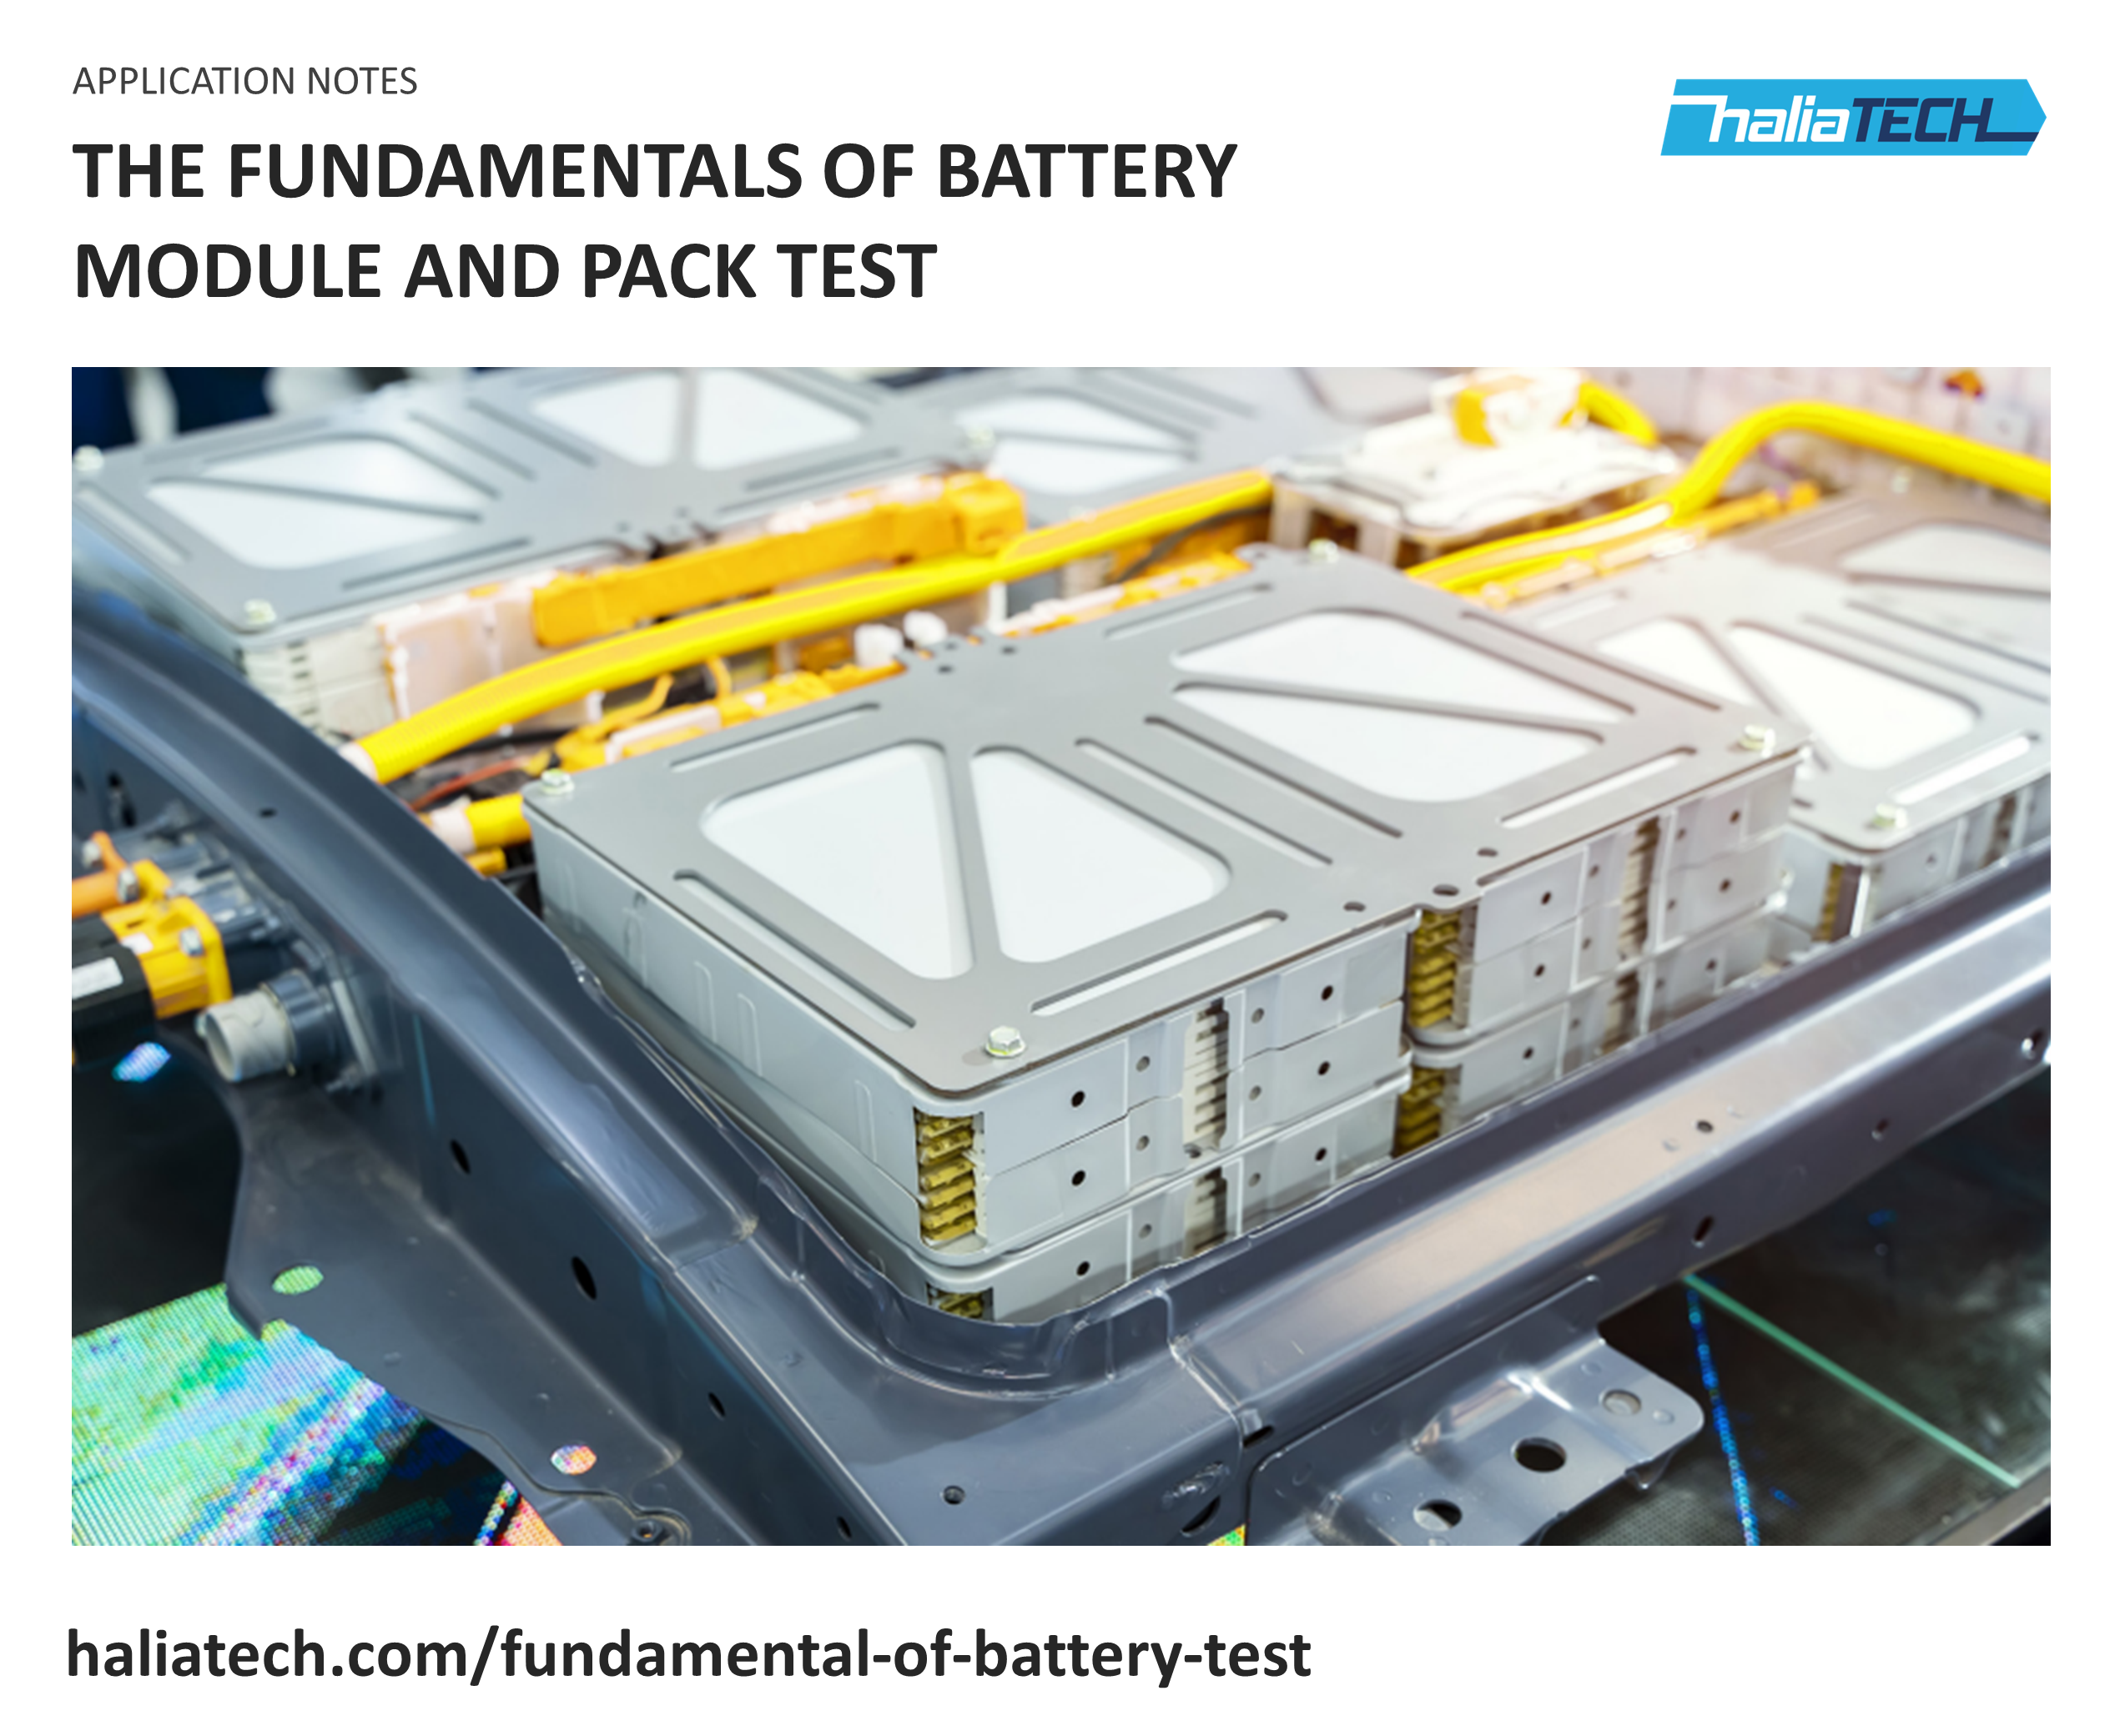 The Fundamentals of Battery Test